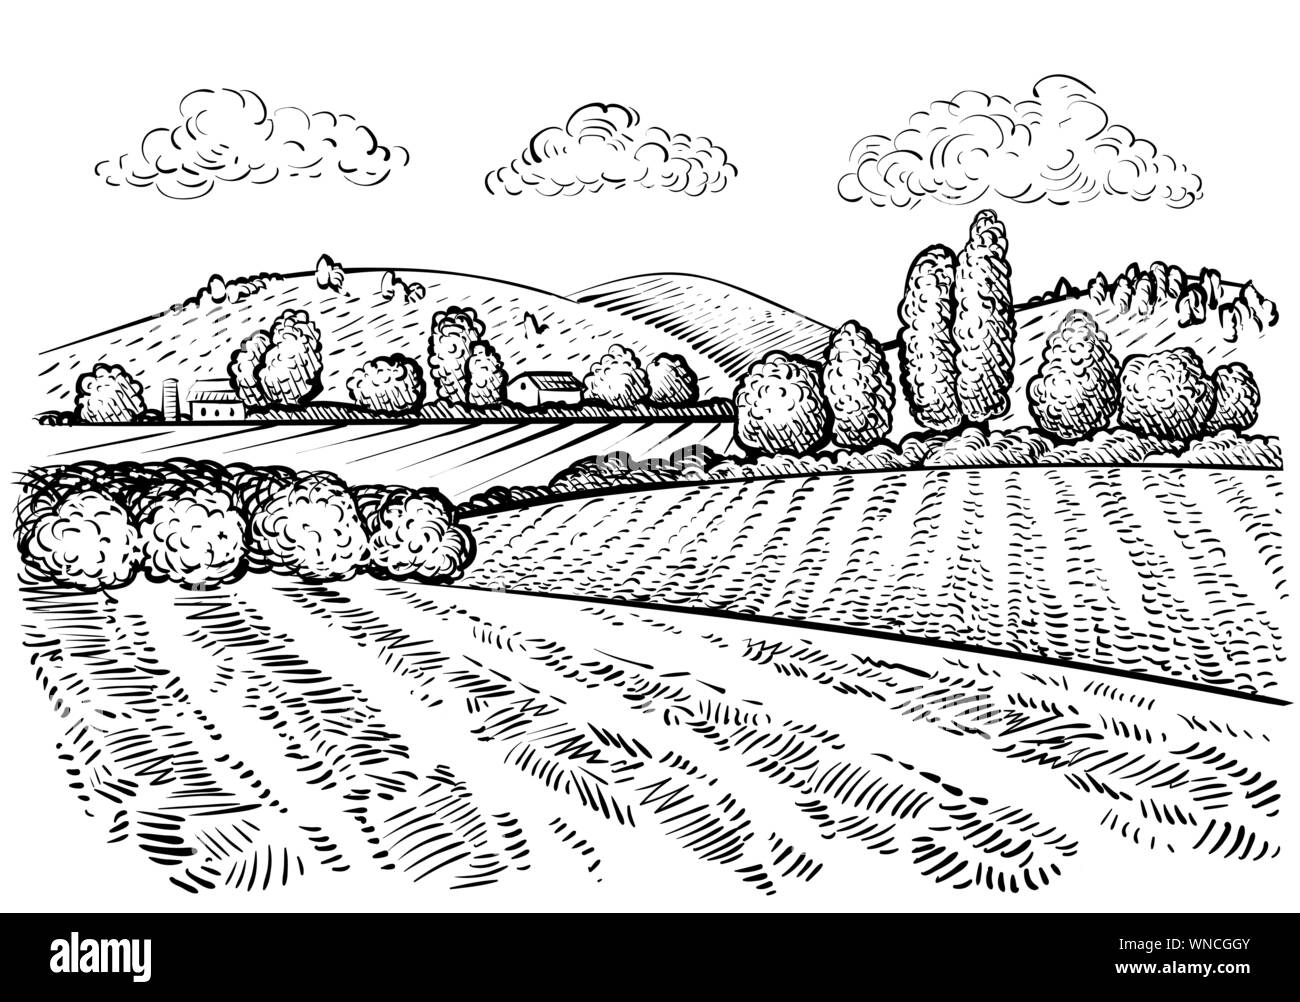 Rural landscape, handdrawn inked sketch style illustration. Hand draw illustration of outdoor natural scenic. Agricultural farm and field. Vector monochrome outline image Stock Vector